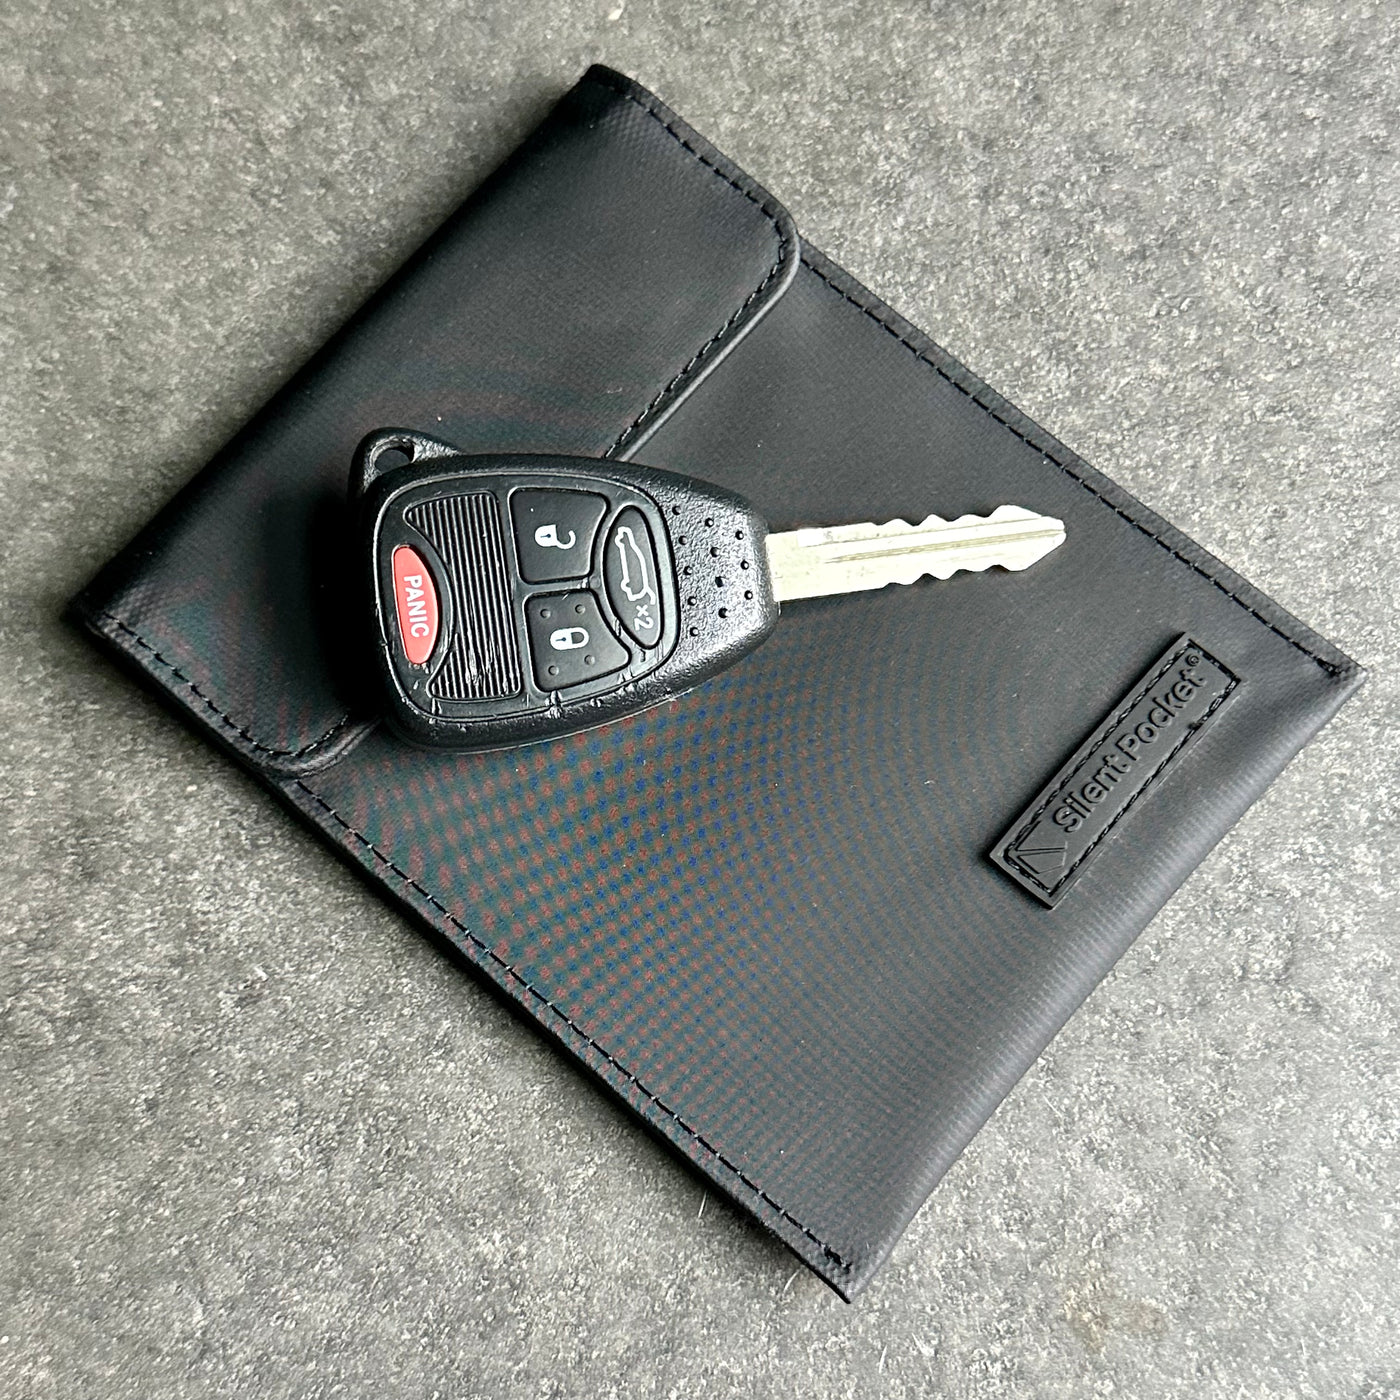 Silent Pocket Magnetic Faraday Sleeve Key Fob Pouch